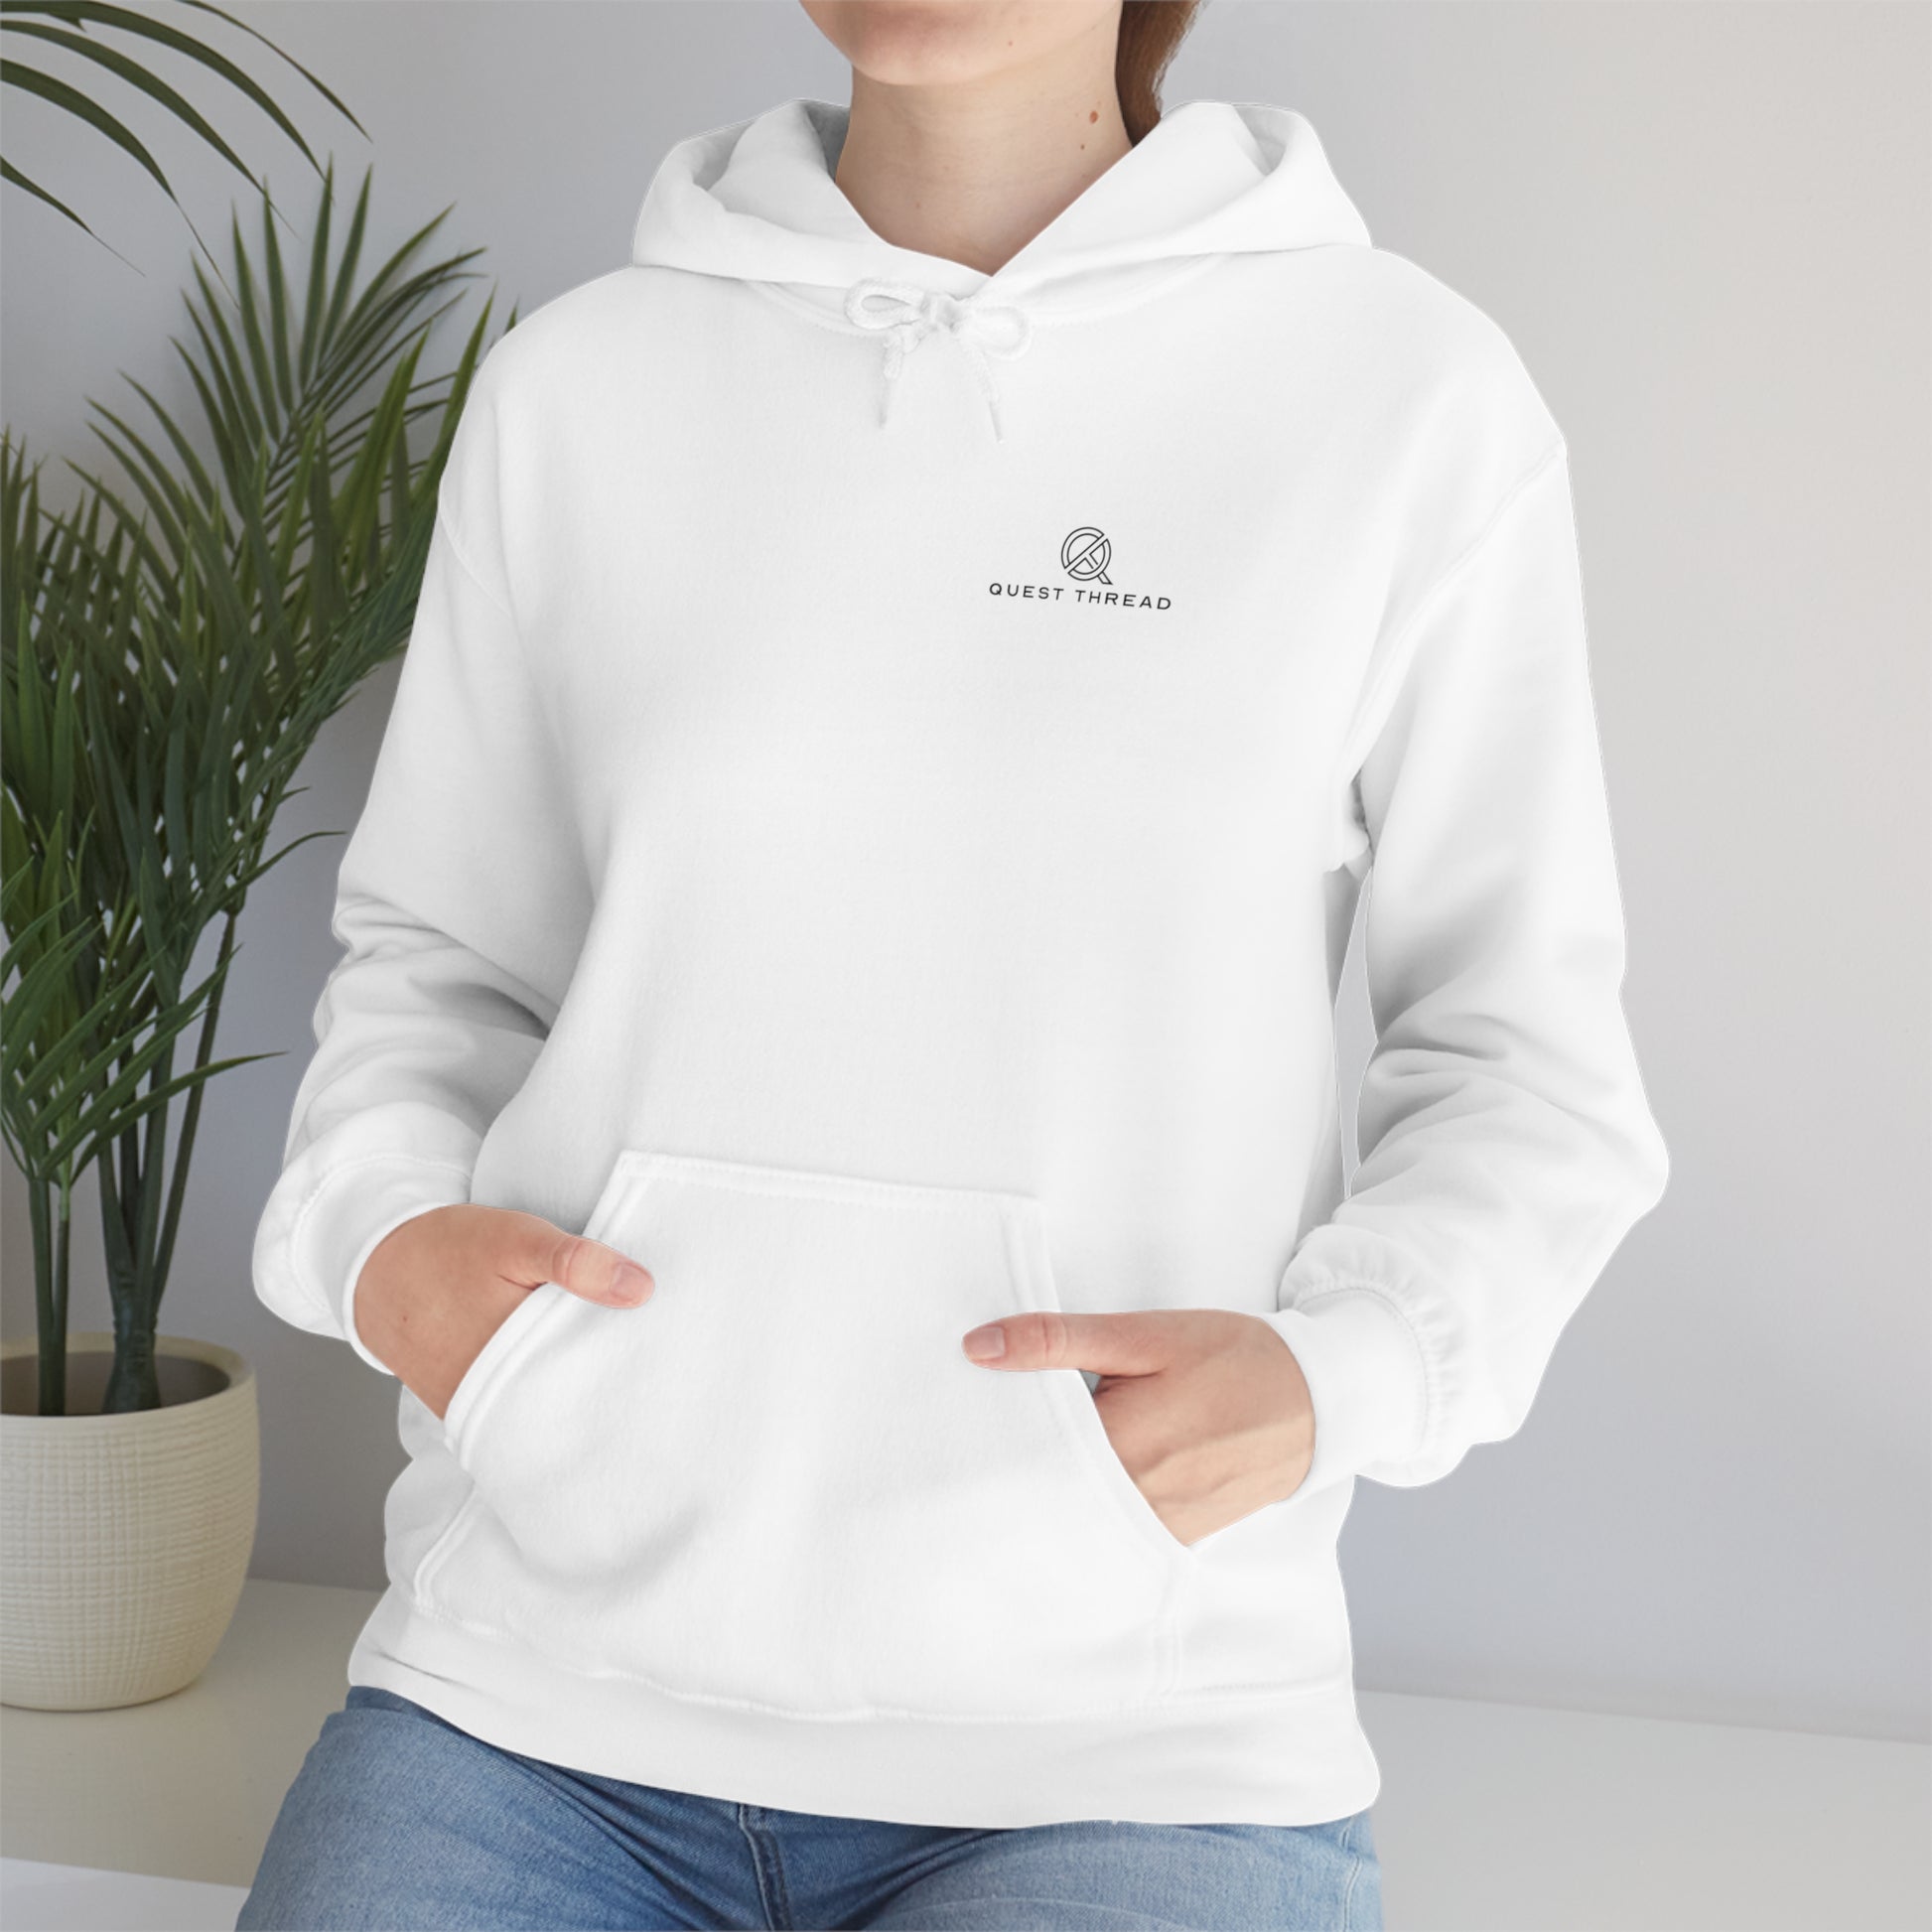 white-quest-thread-hoodie-with-small-logo-on-left-chest